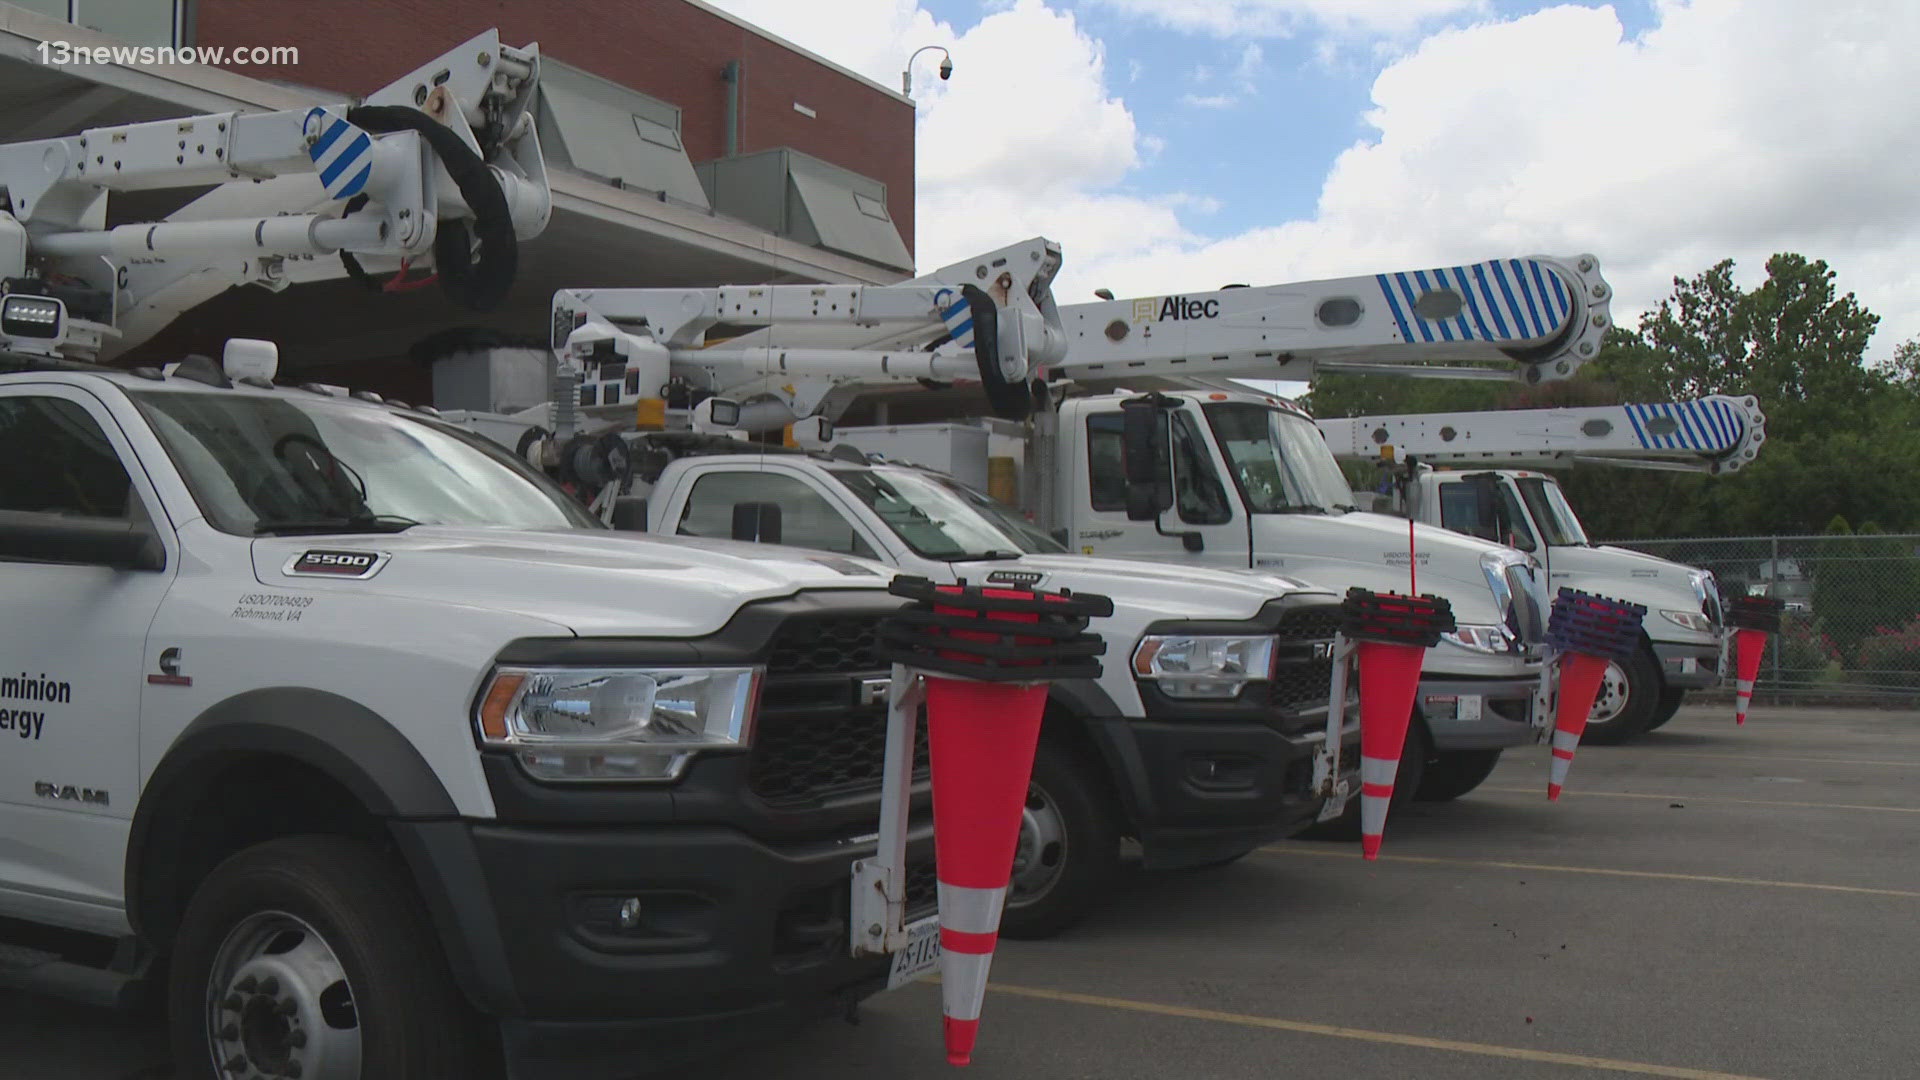 Forecasters have predicted an active season and Dominion Energy wrapped up a storm training drill.